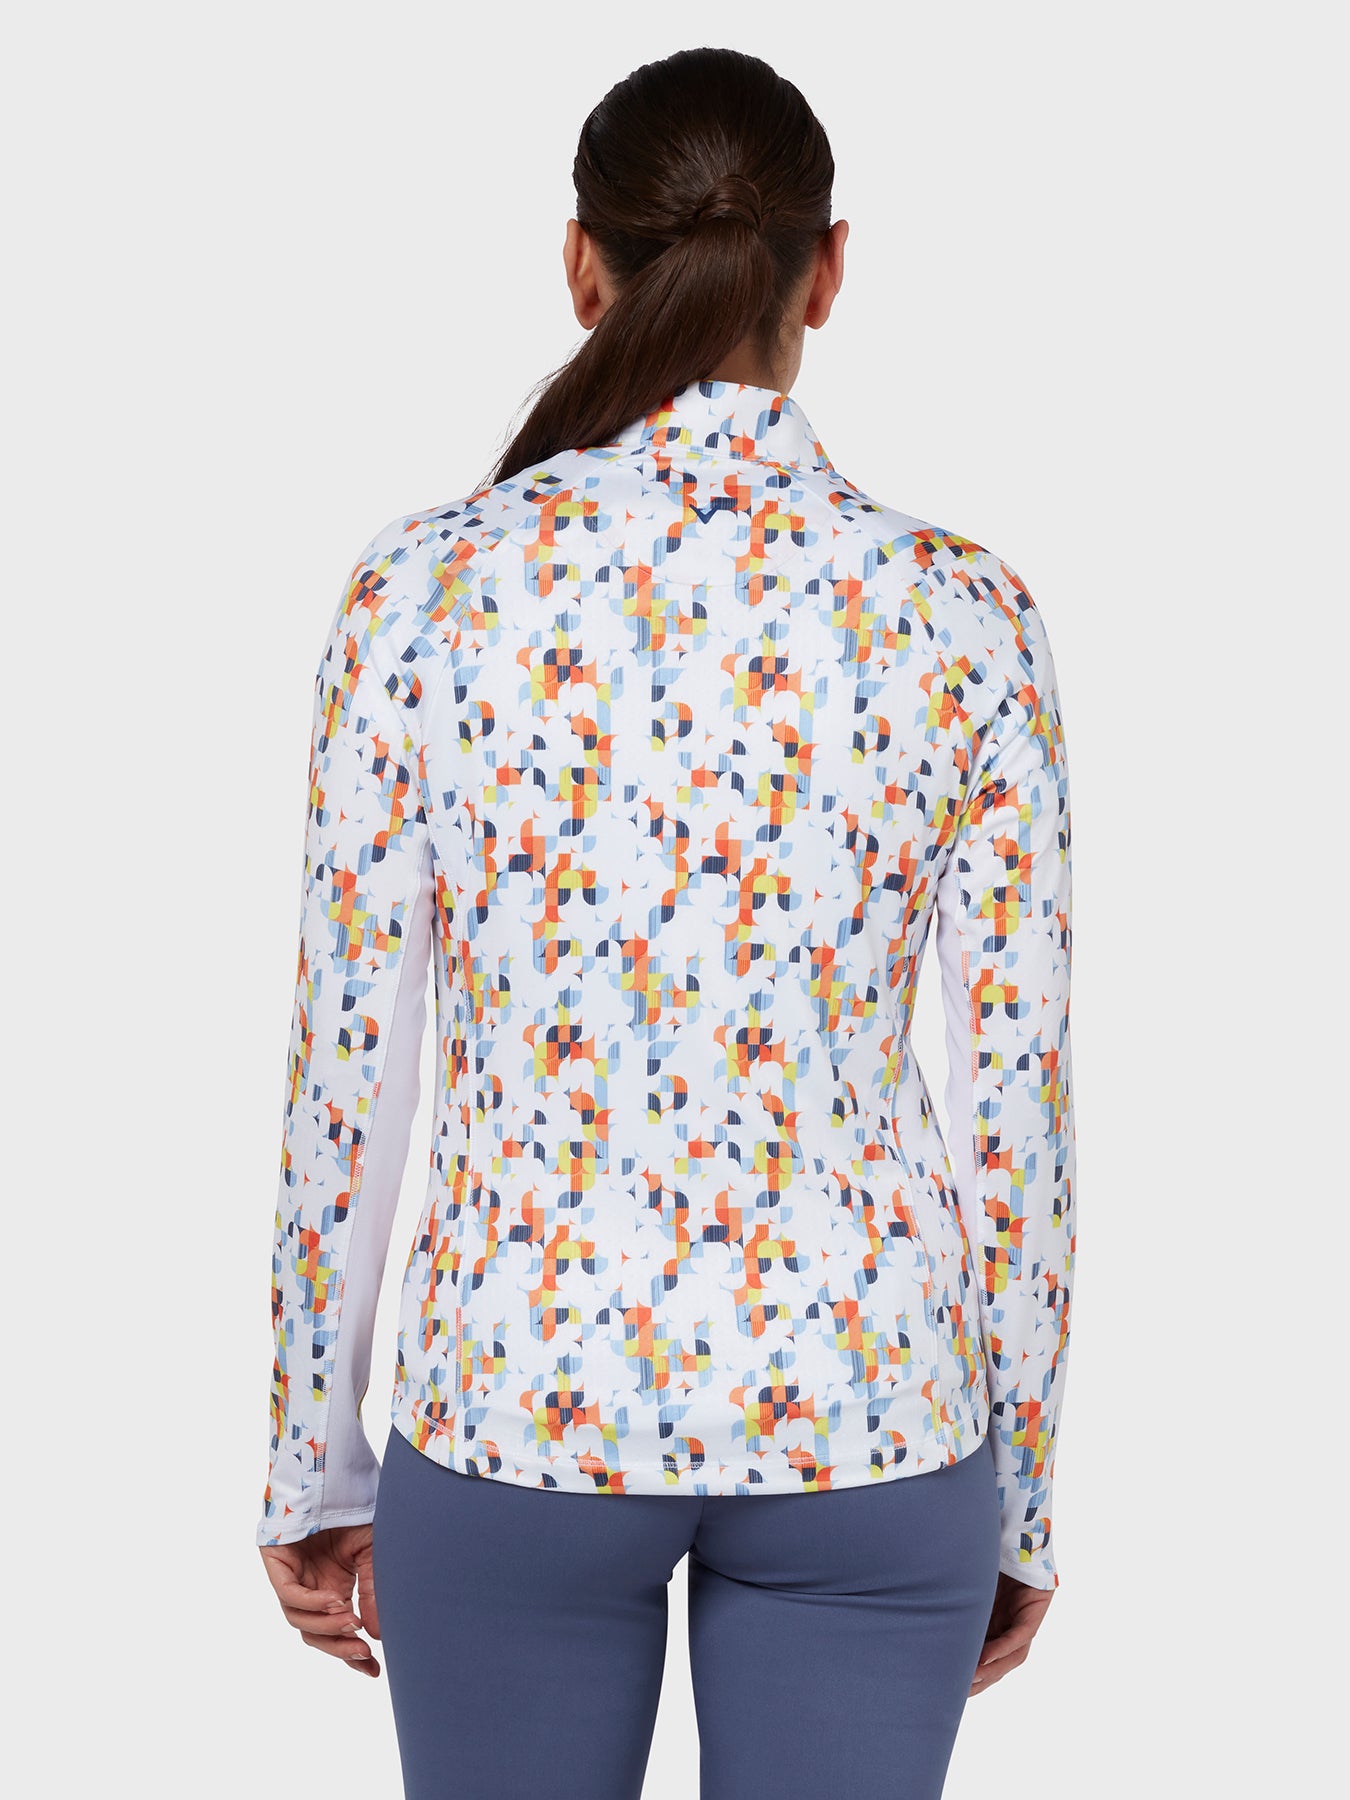 Shift Geo Printed Sun Protection Top